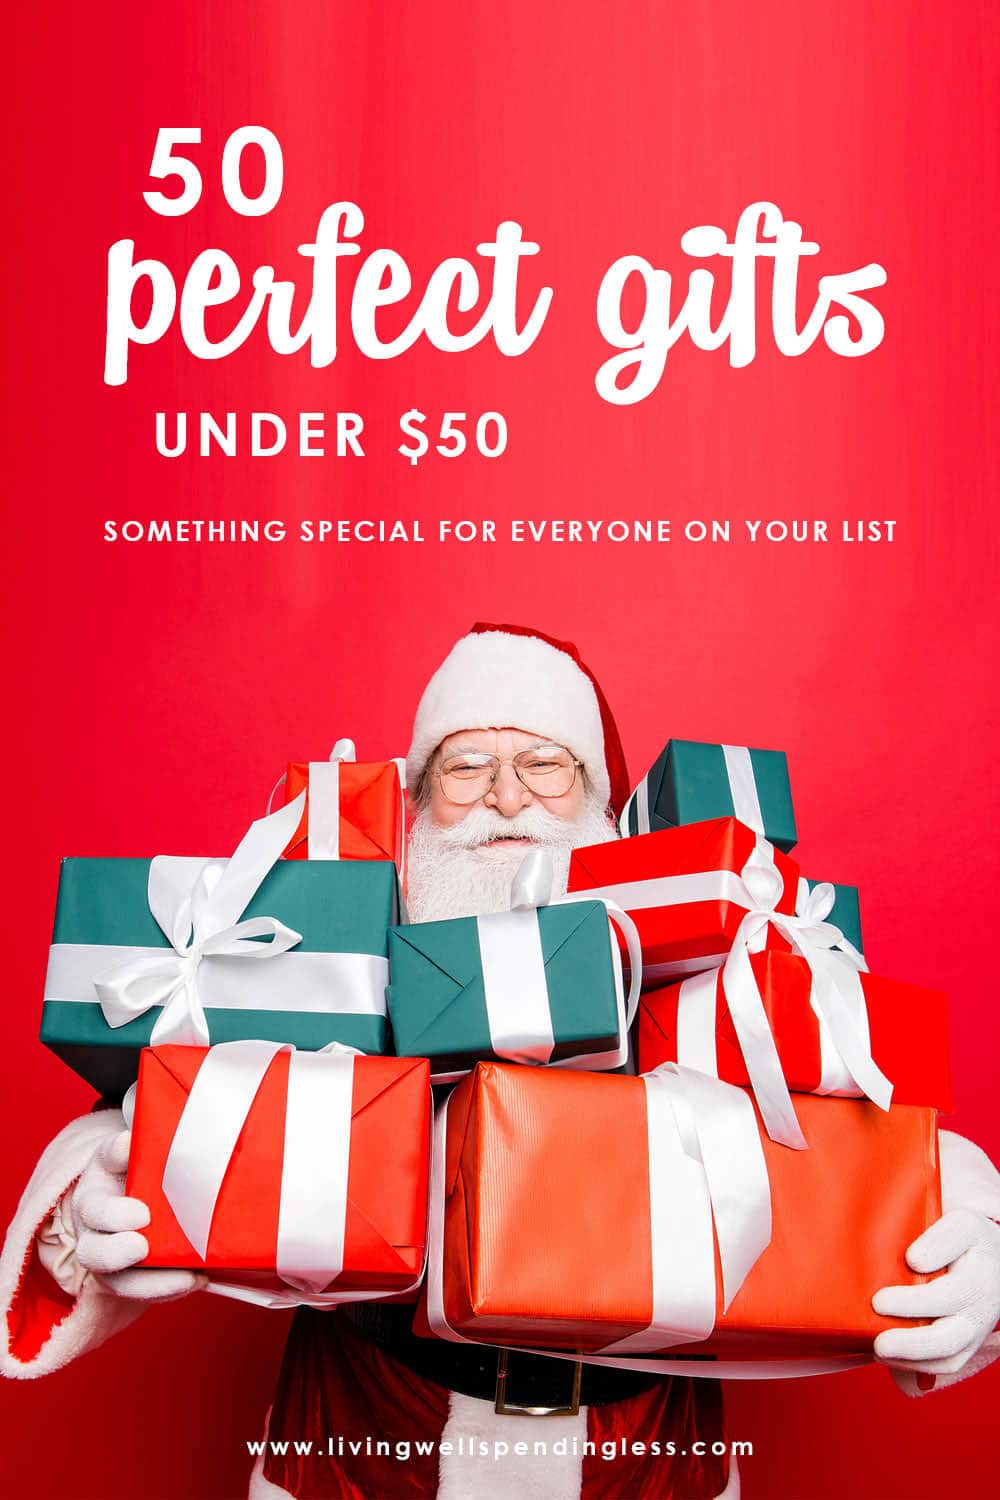 Searching for the perfect gift? Look no further than this ULTIMATE online holiday shopping guide! Our team spent more than 2 weeks competing to find the very BEST gifts in every category - all so you could avoid the mall this year! (You're welcome!) Don't miss these 50 perfect gifts under $50 for every person on your list! #shopping #shoppingtips #giftguides #holiday #shoppingguide #christmas #holidays